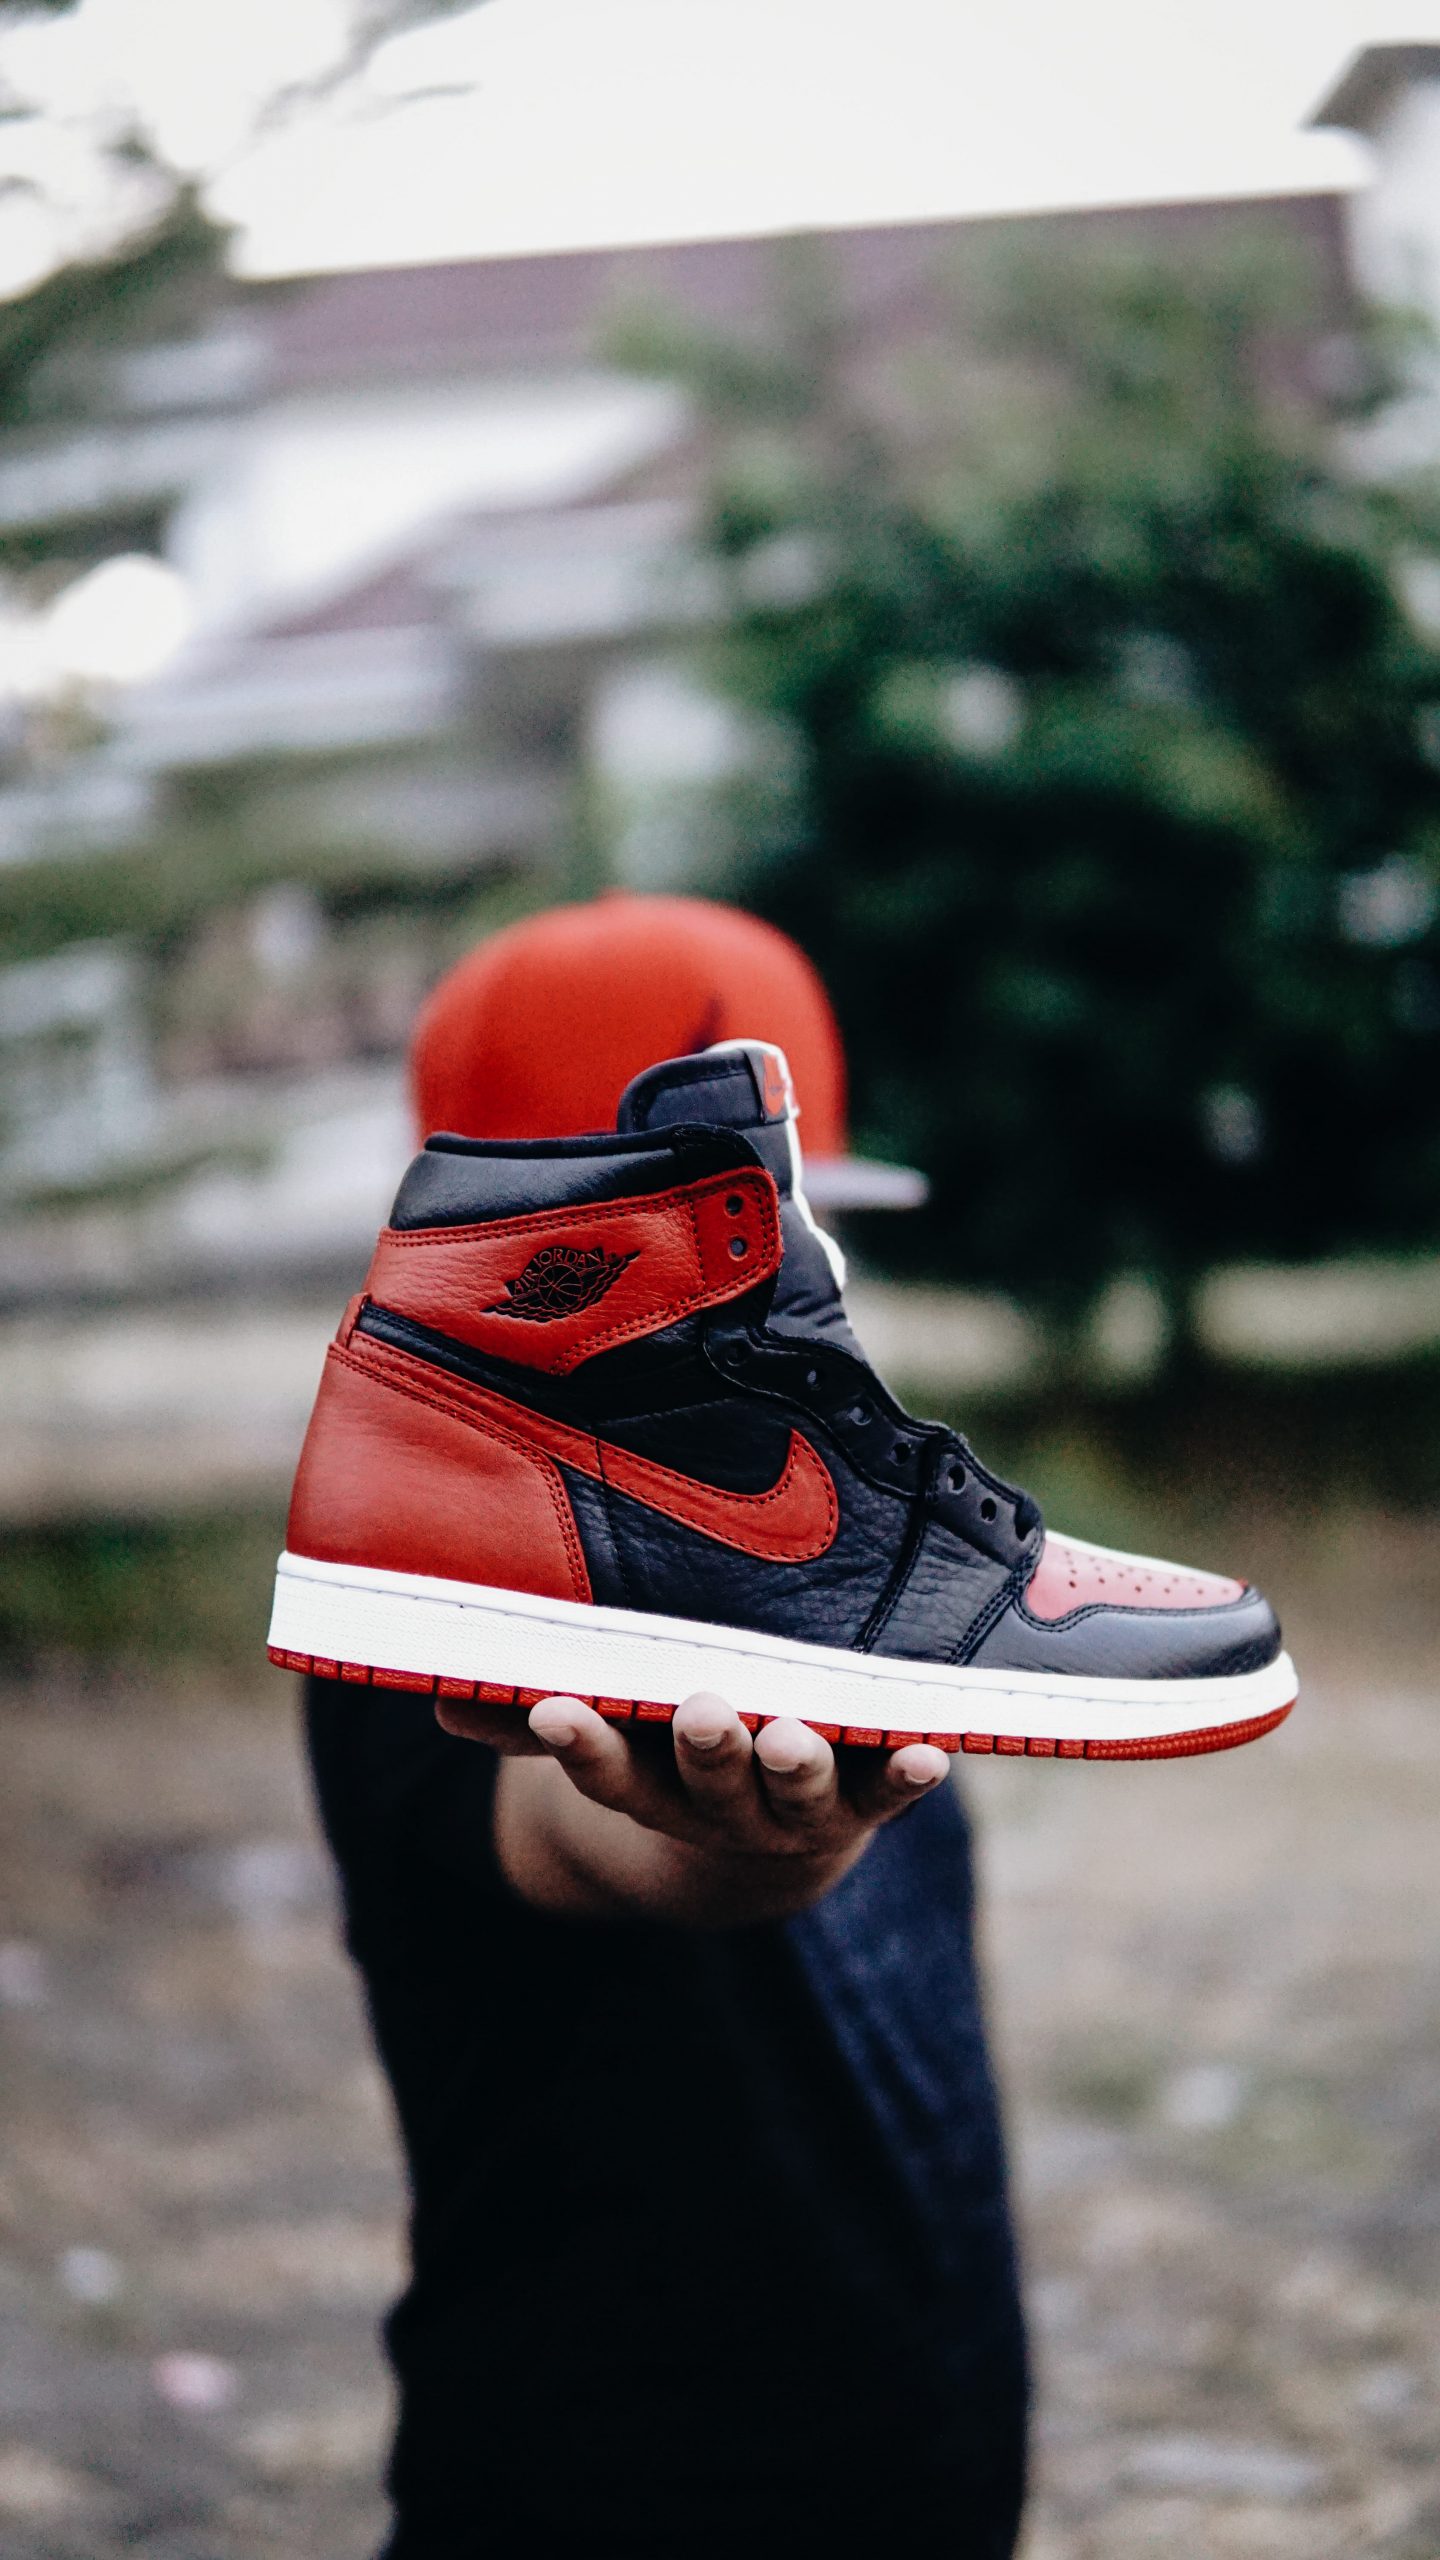 Wallpaper selective focus photo of person holding unpaired black and red Nike Air Jordan 1 shoe